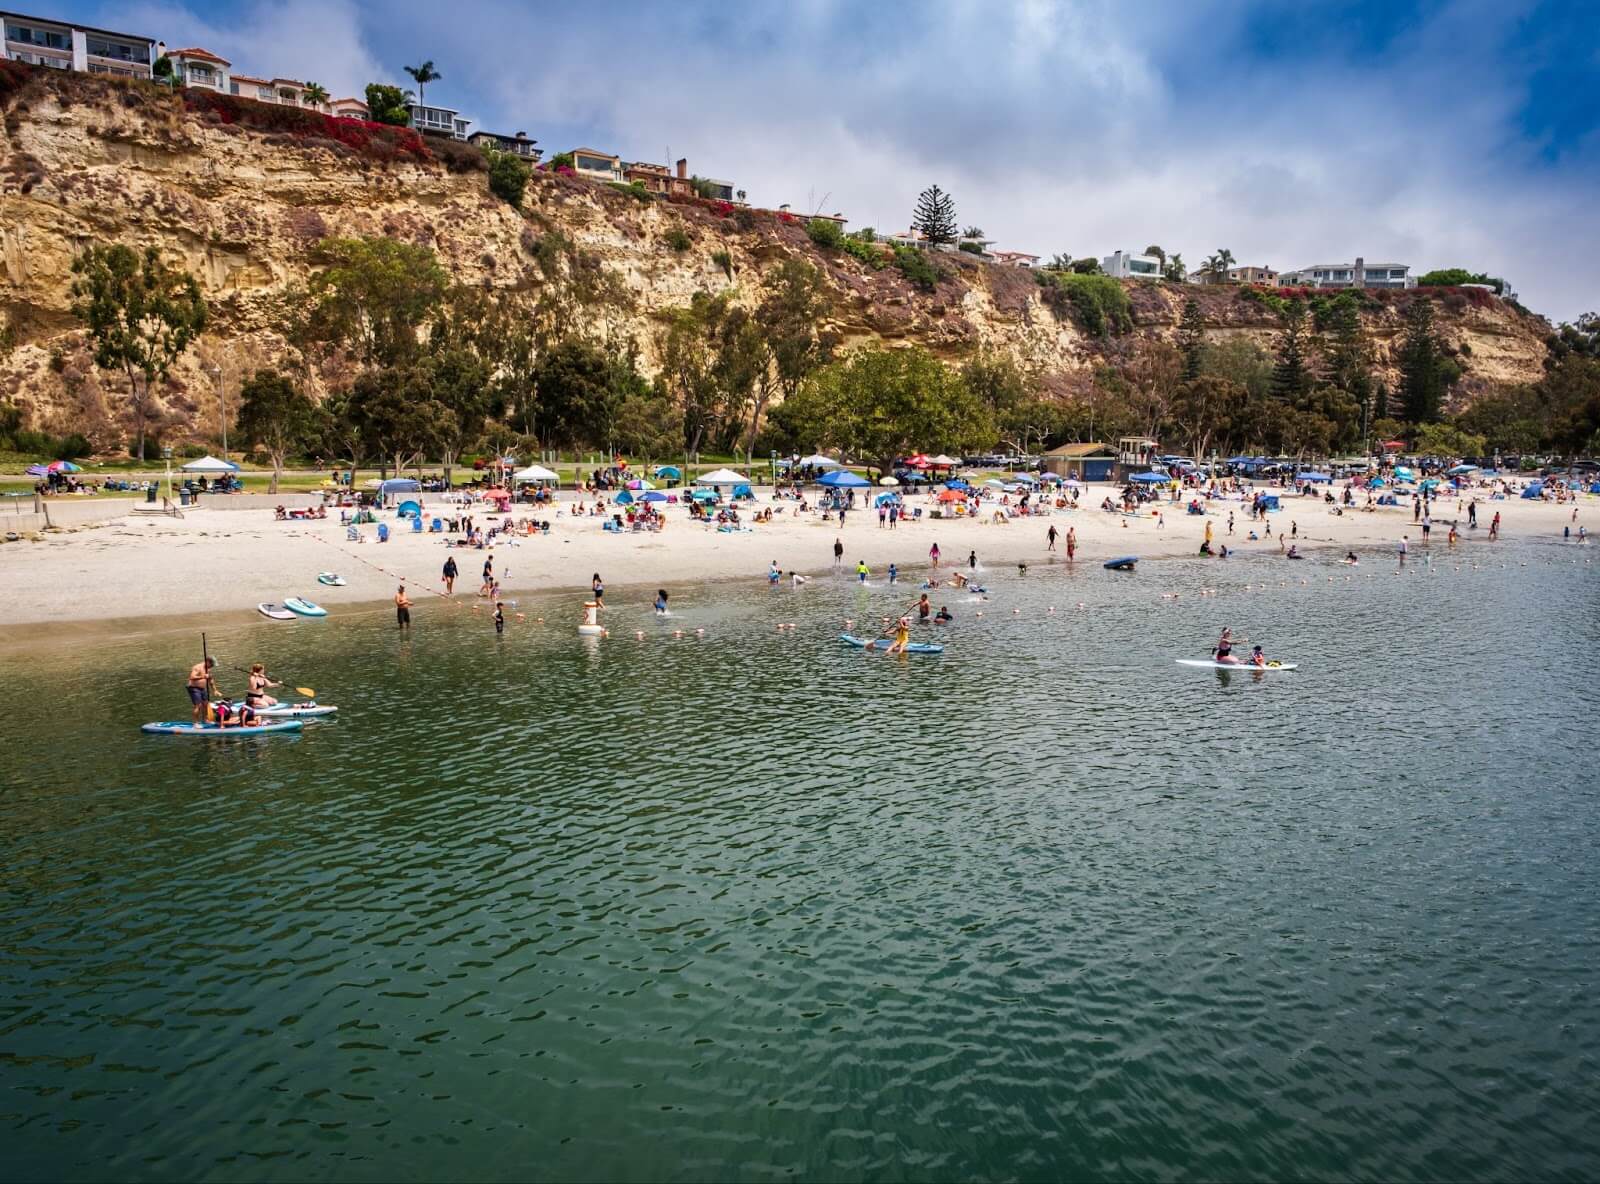 The Top 6 Things To Do In Dana Point